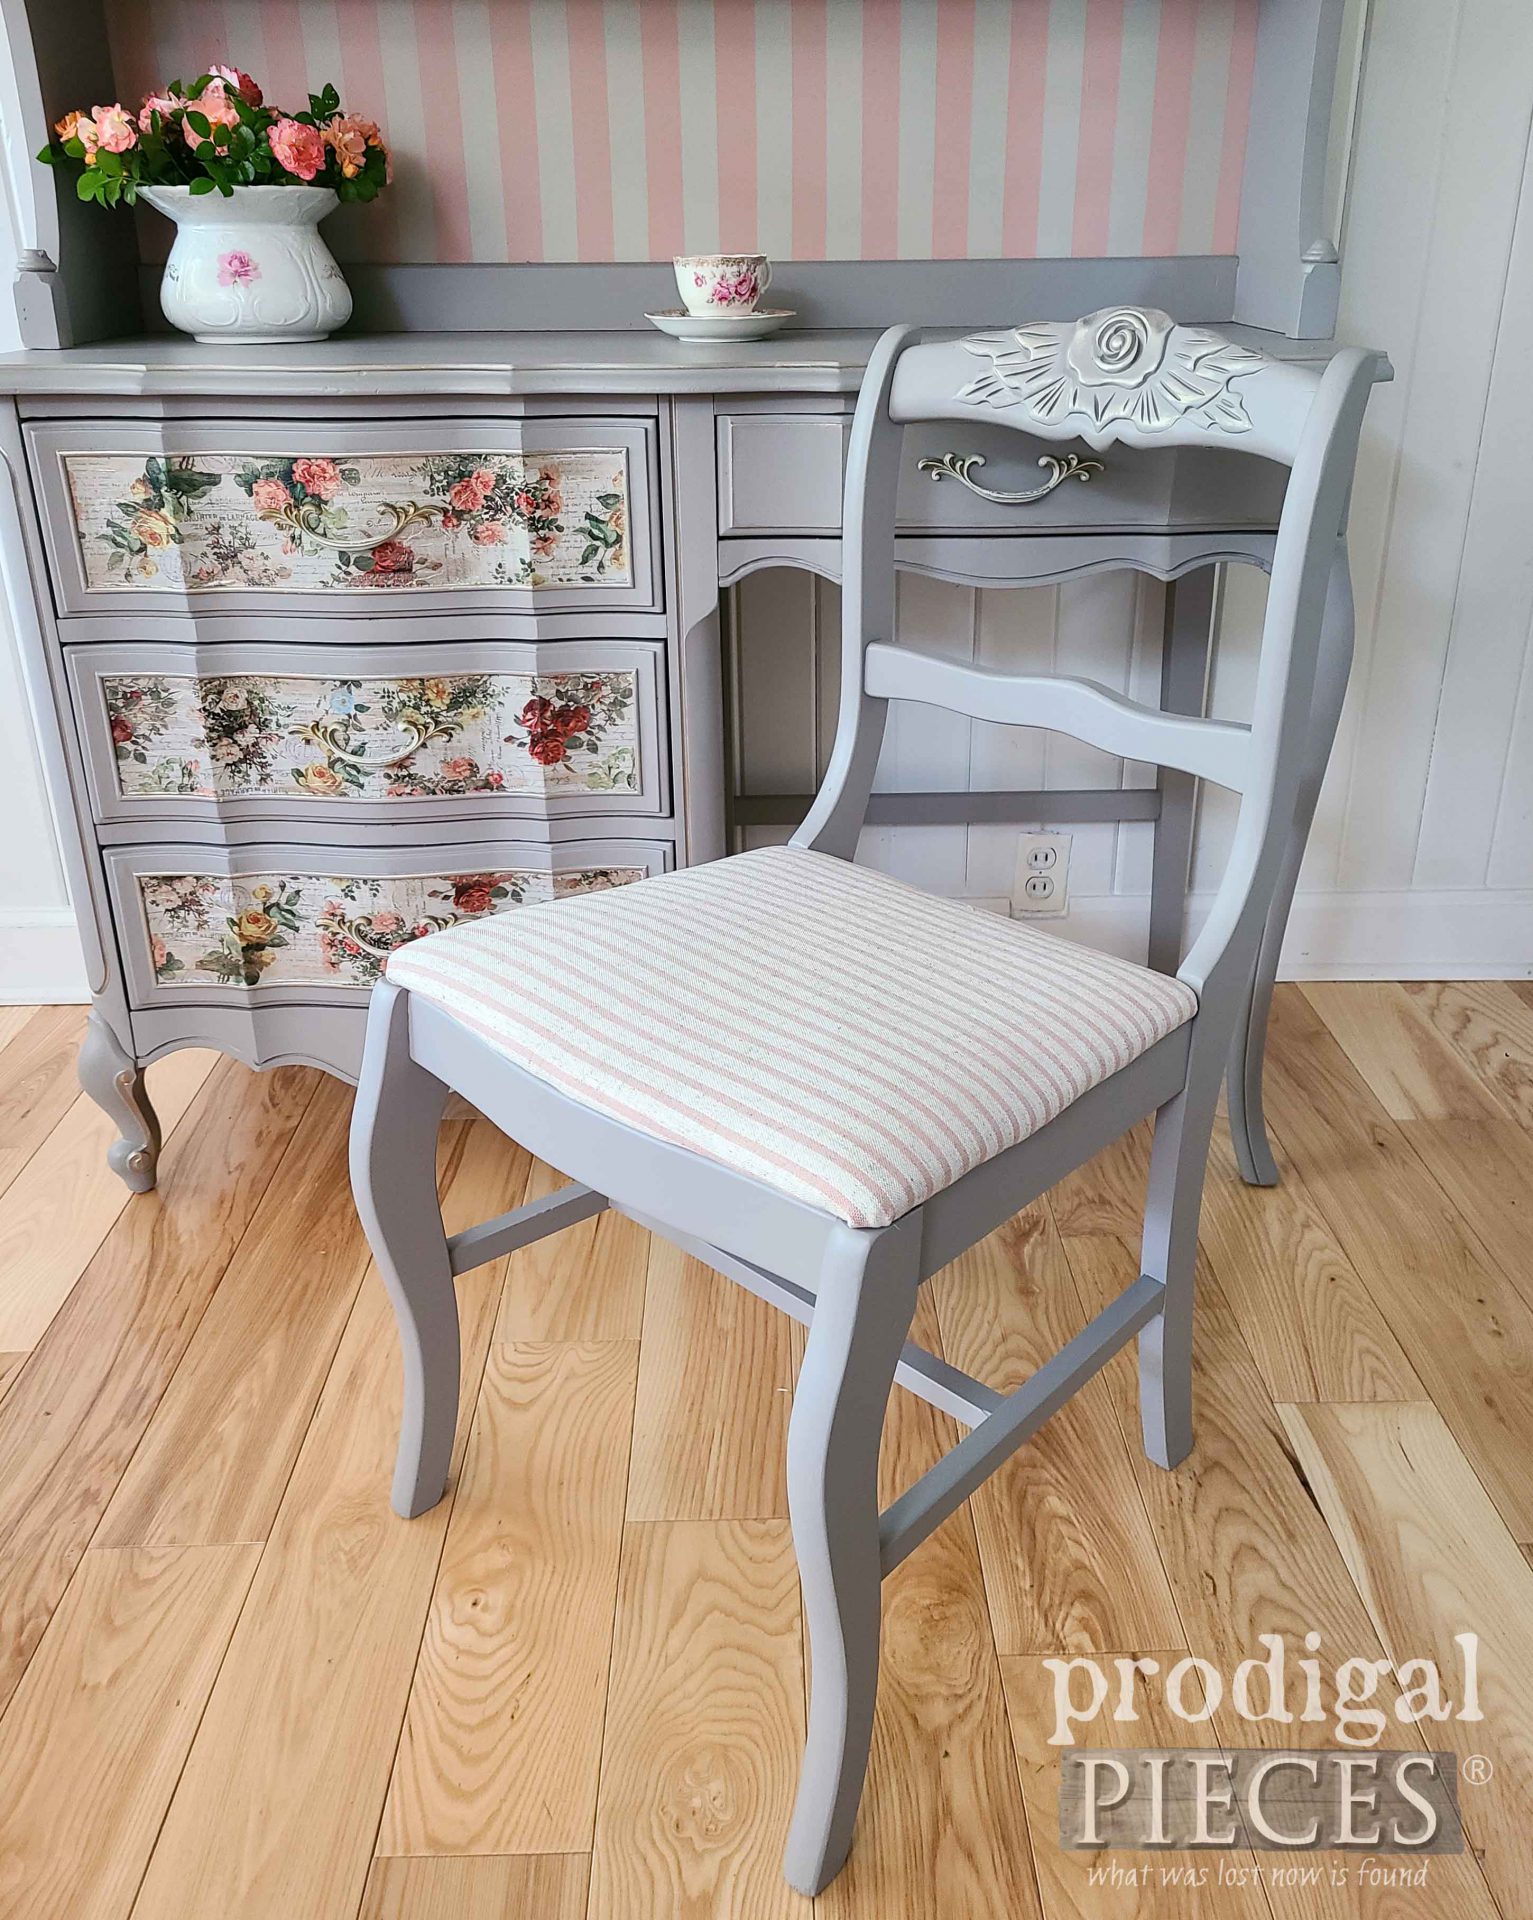 Vintage French Provincial Chair with Pink Stripe Upholstery by Larissa of Prodigal Pieces | prodigalpieces.com #prodigalpieces #upholstery #home